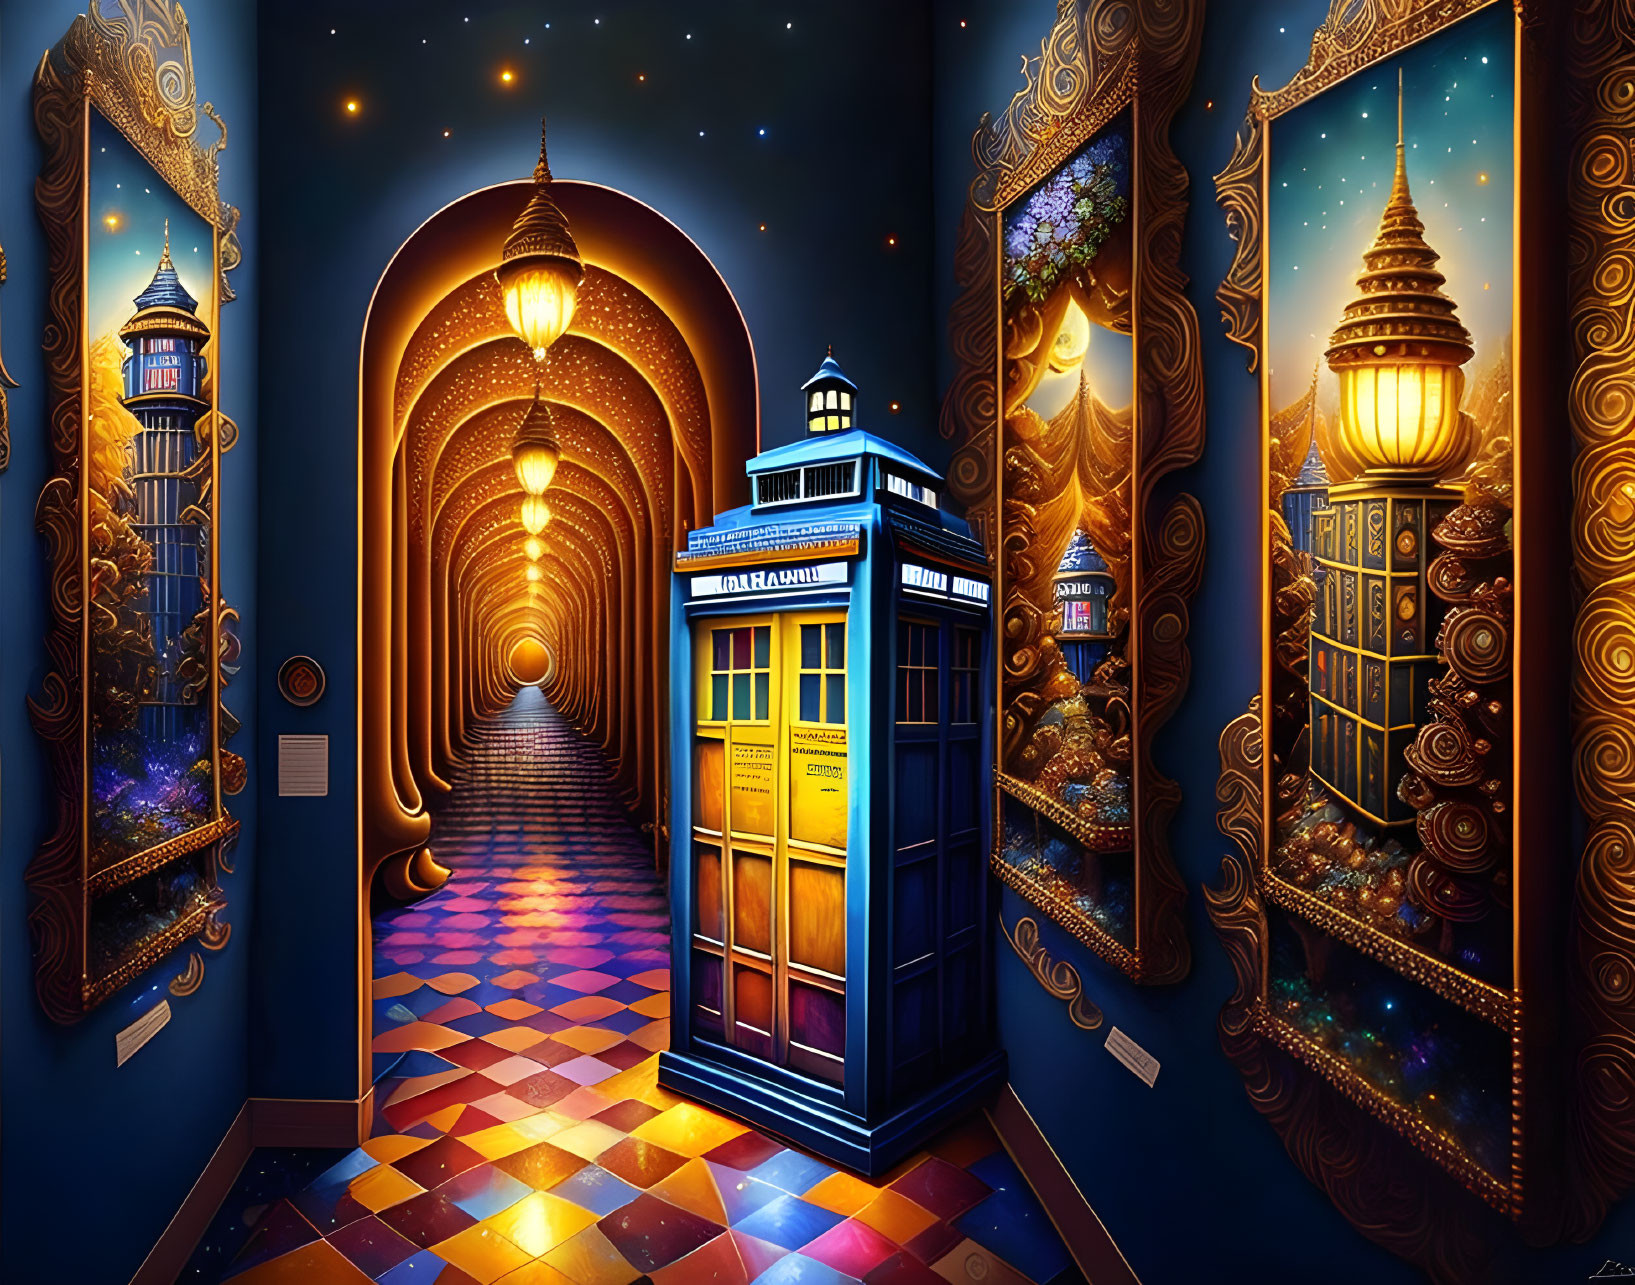 Surreal corridor with hanging lanterns and blue phone booth amid starry doorways